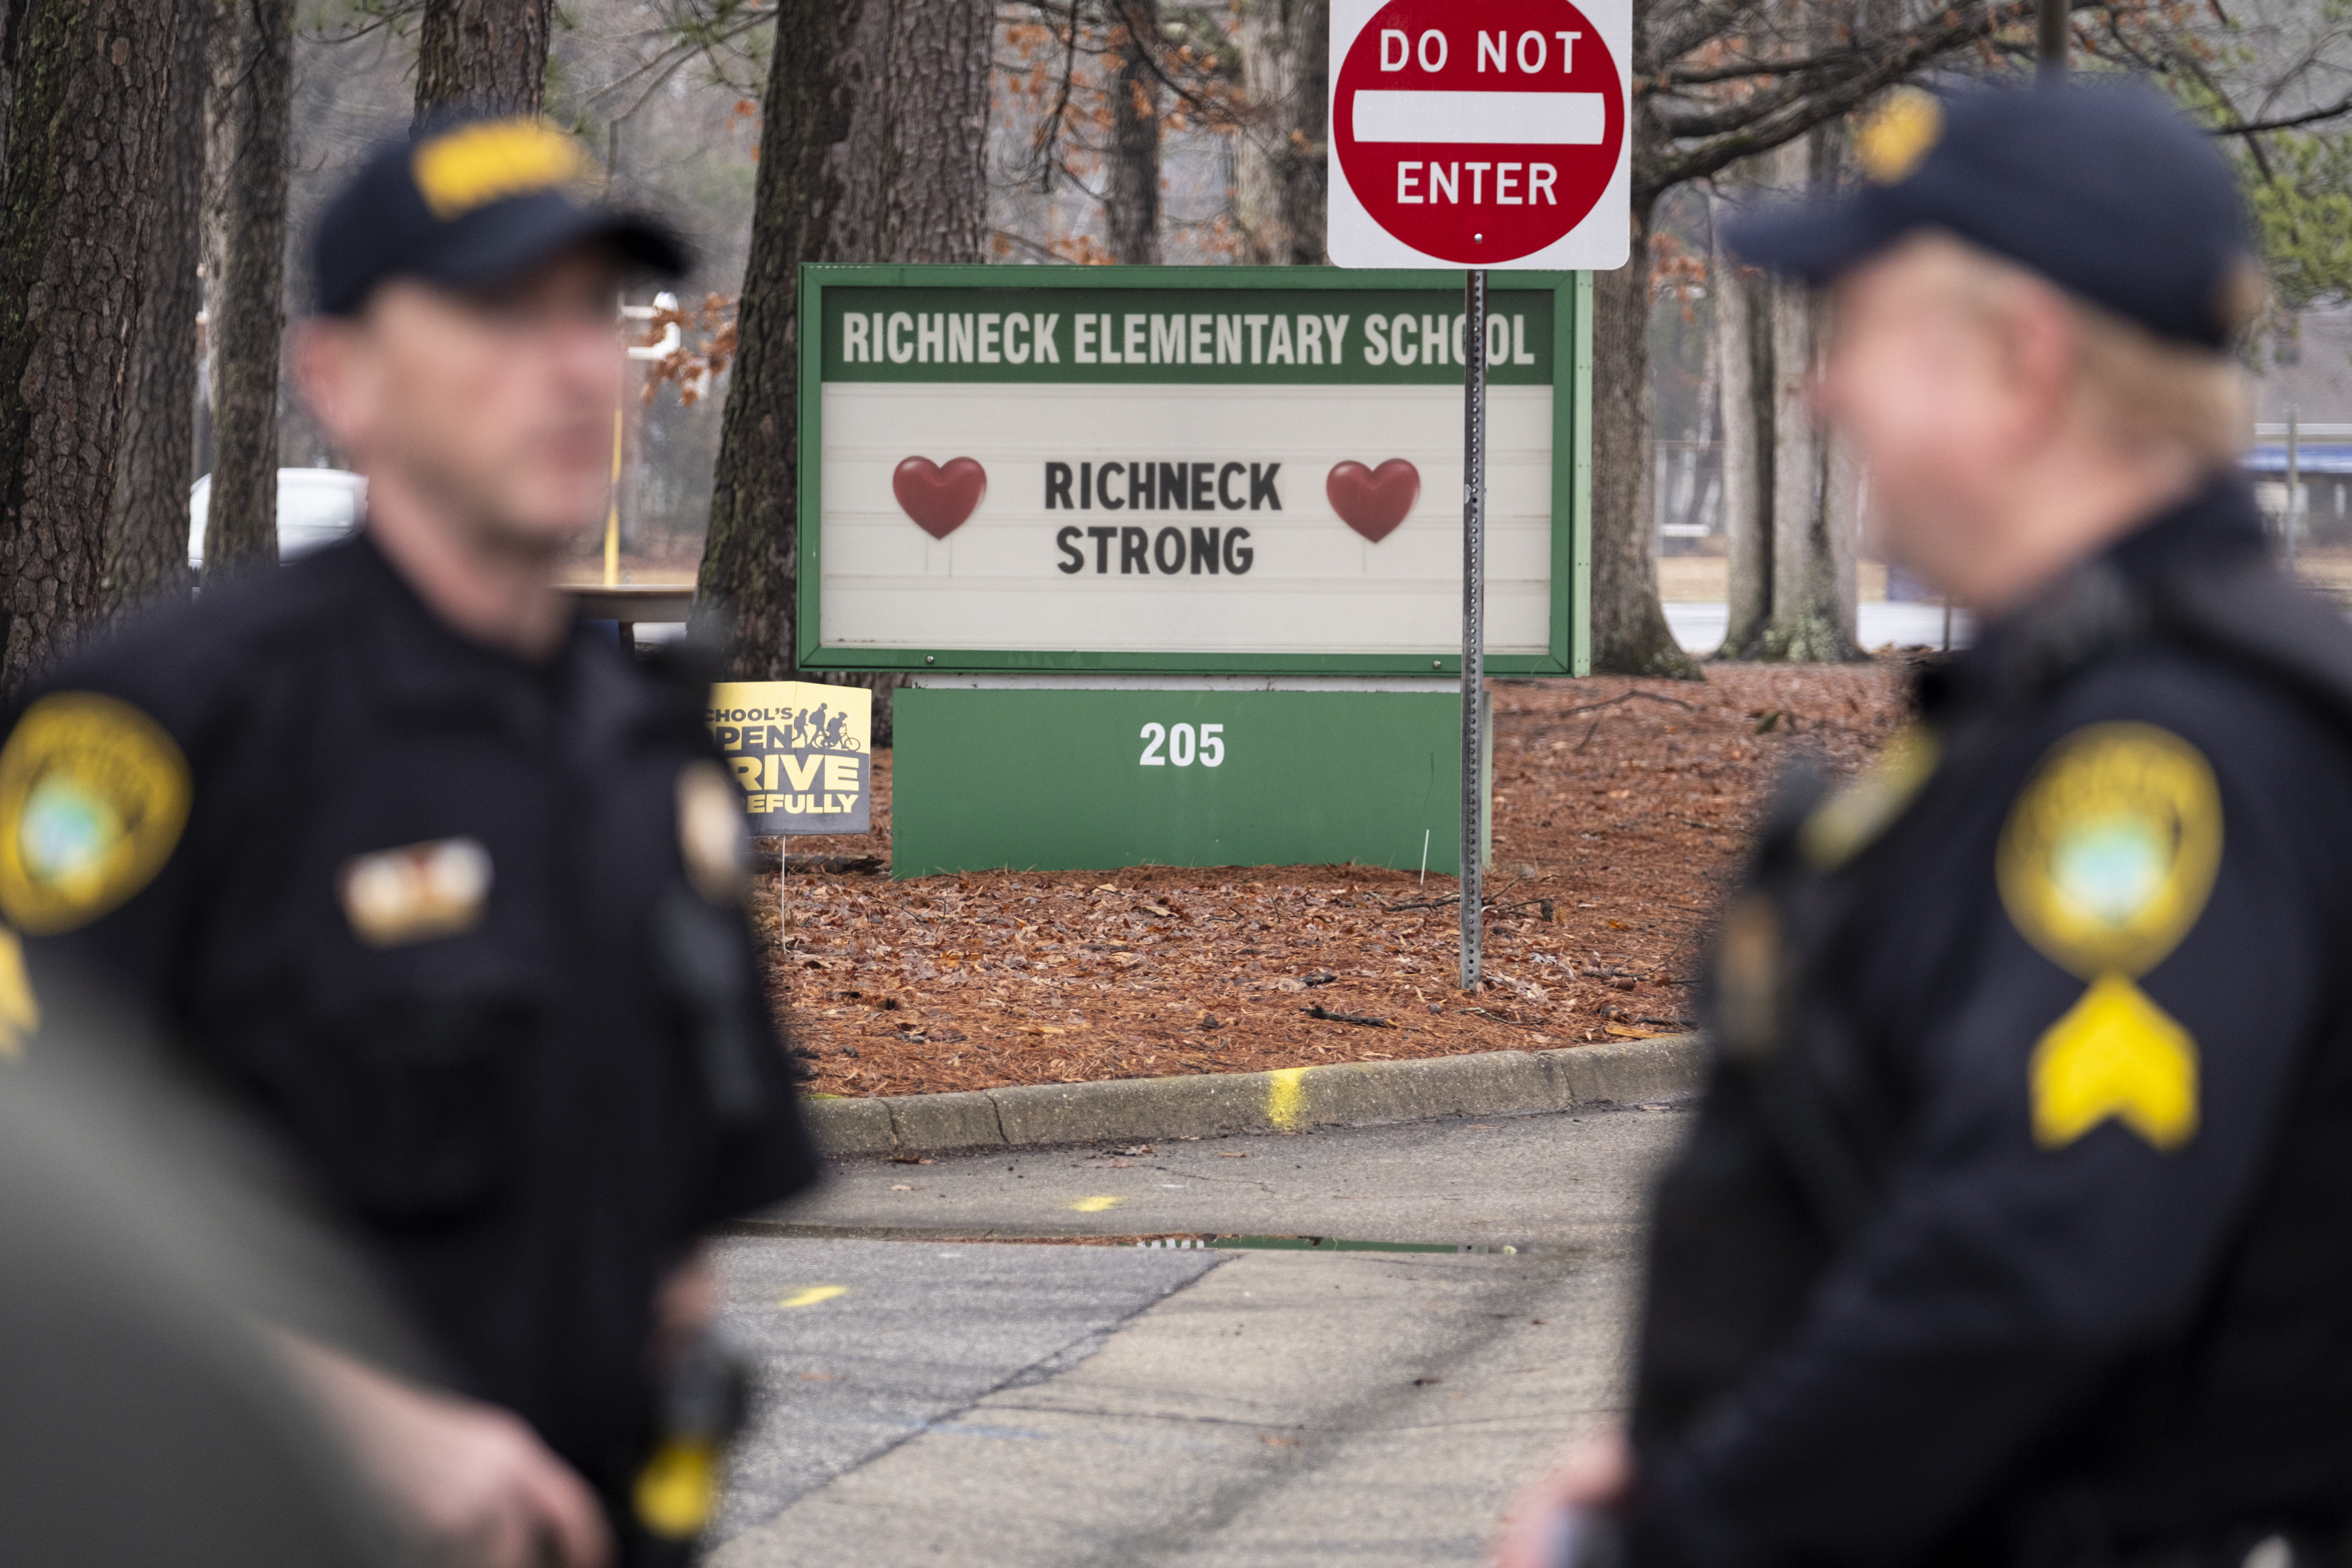 Police look on as students return to Richneck Elementary in Newport News, Virginia, in January. Photo: The Virginian-Pilot via AP